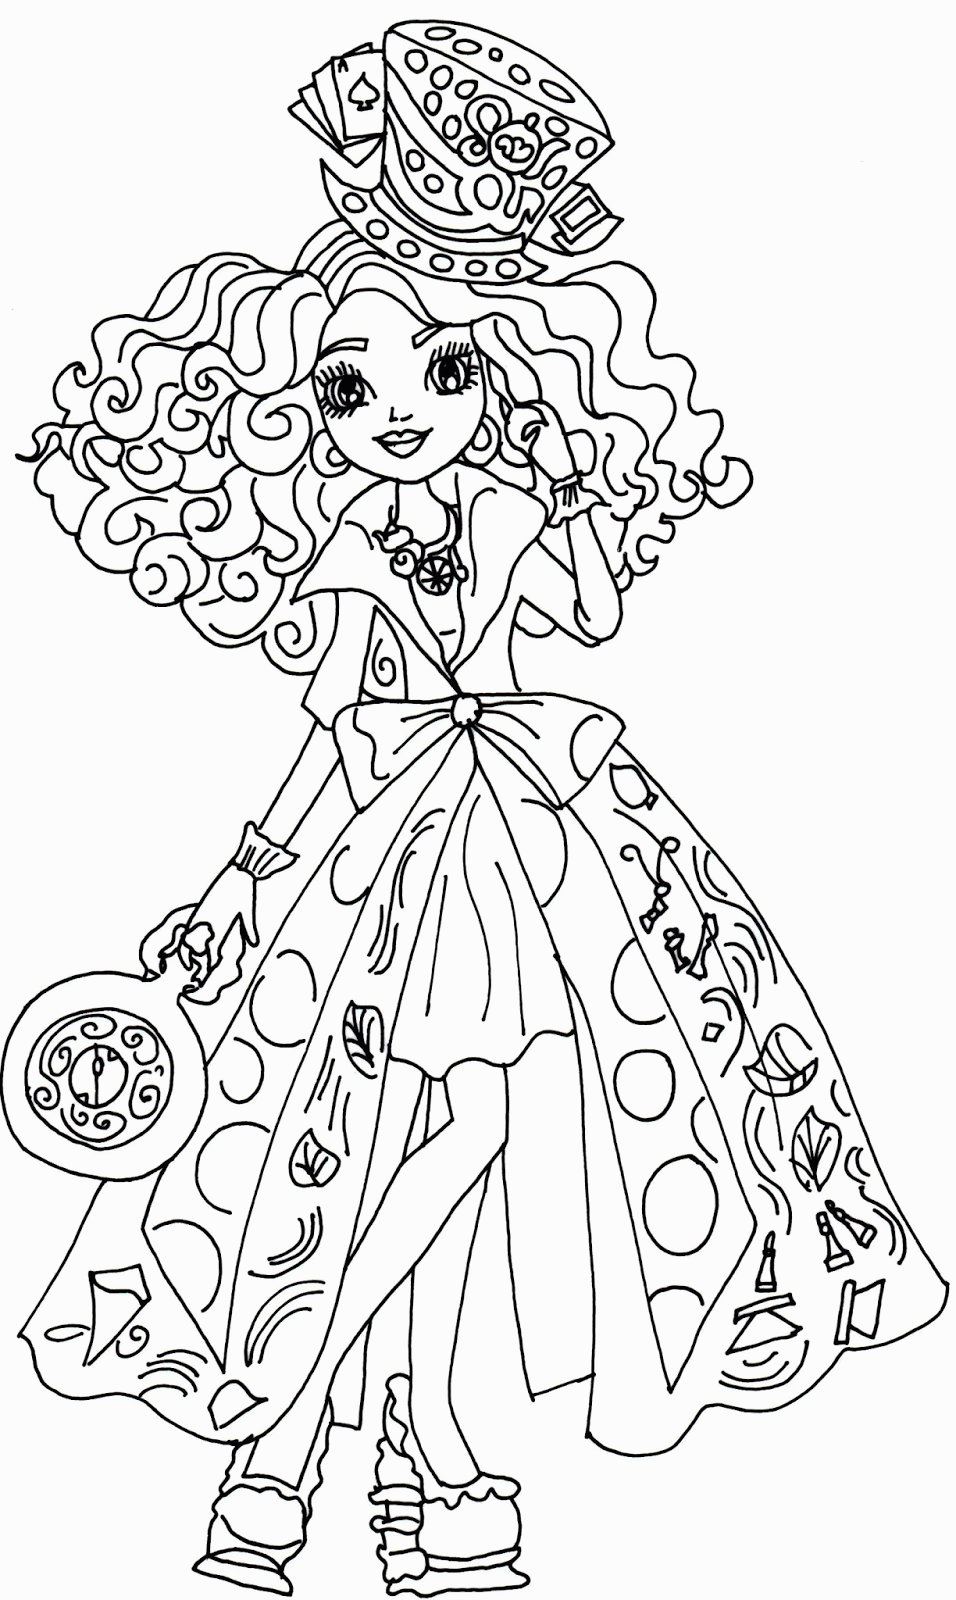 Free Printable Ever After High Coloring Pages: Madeline Hatter Way